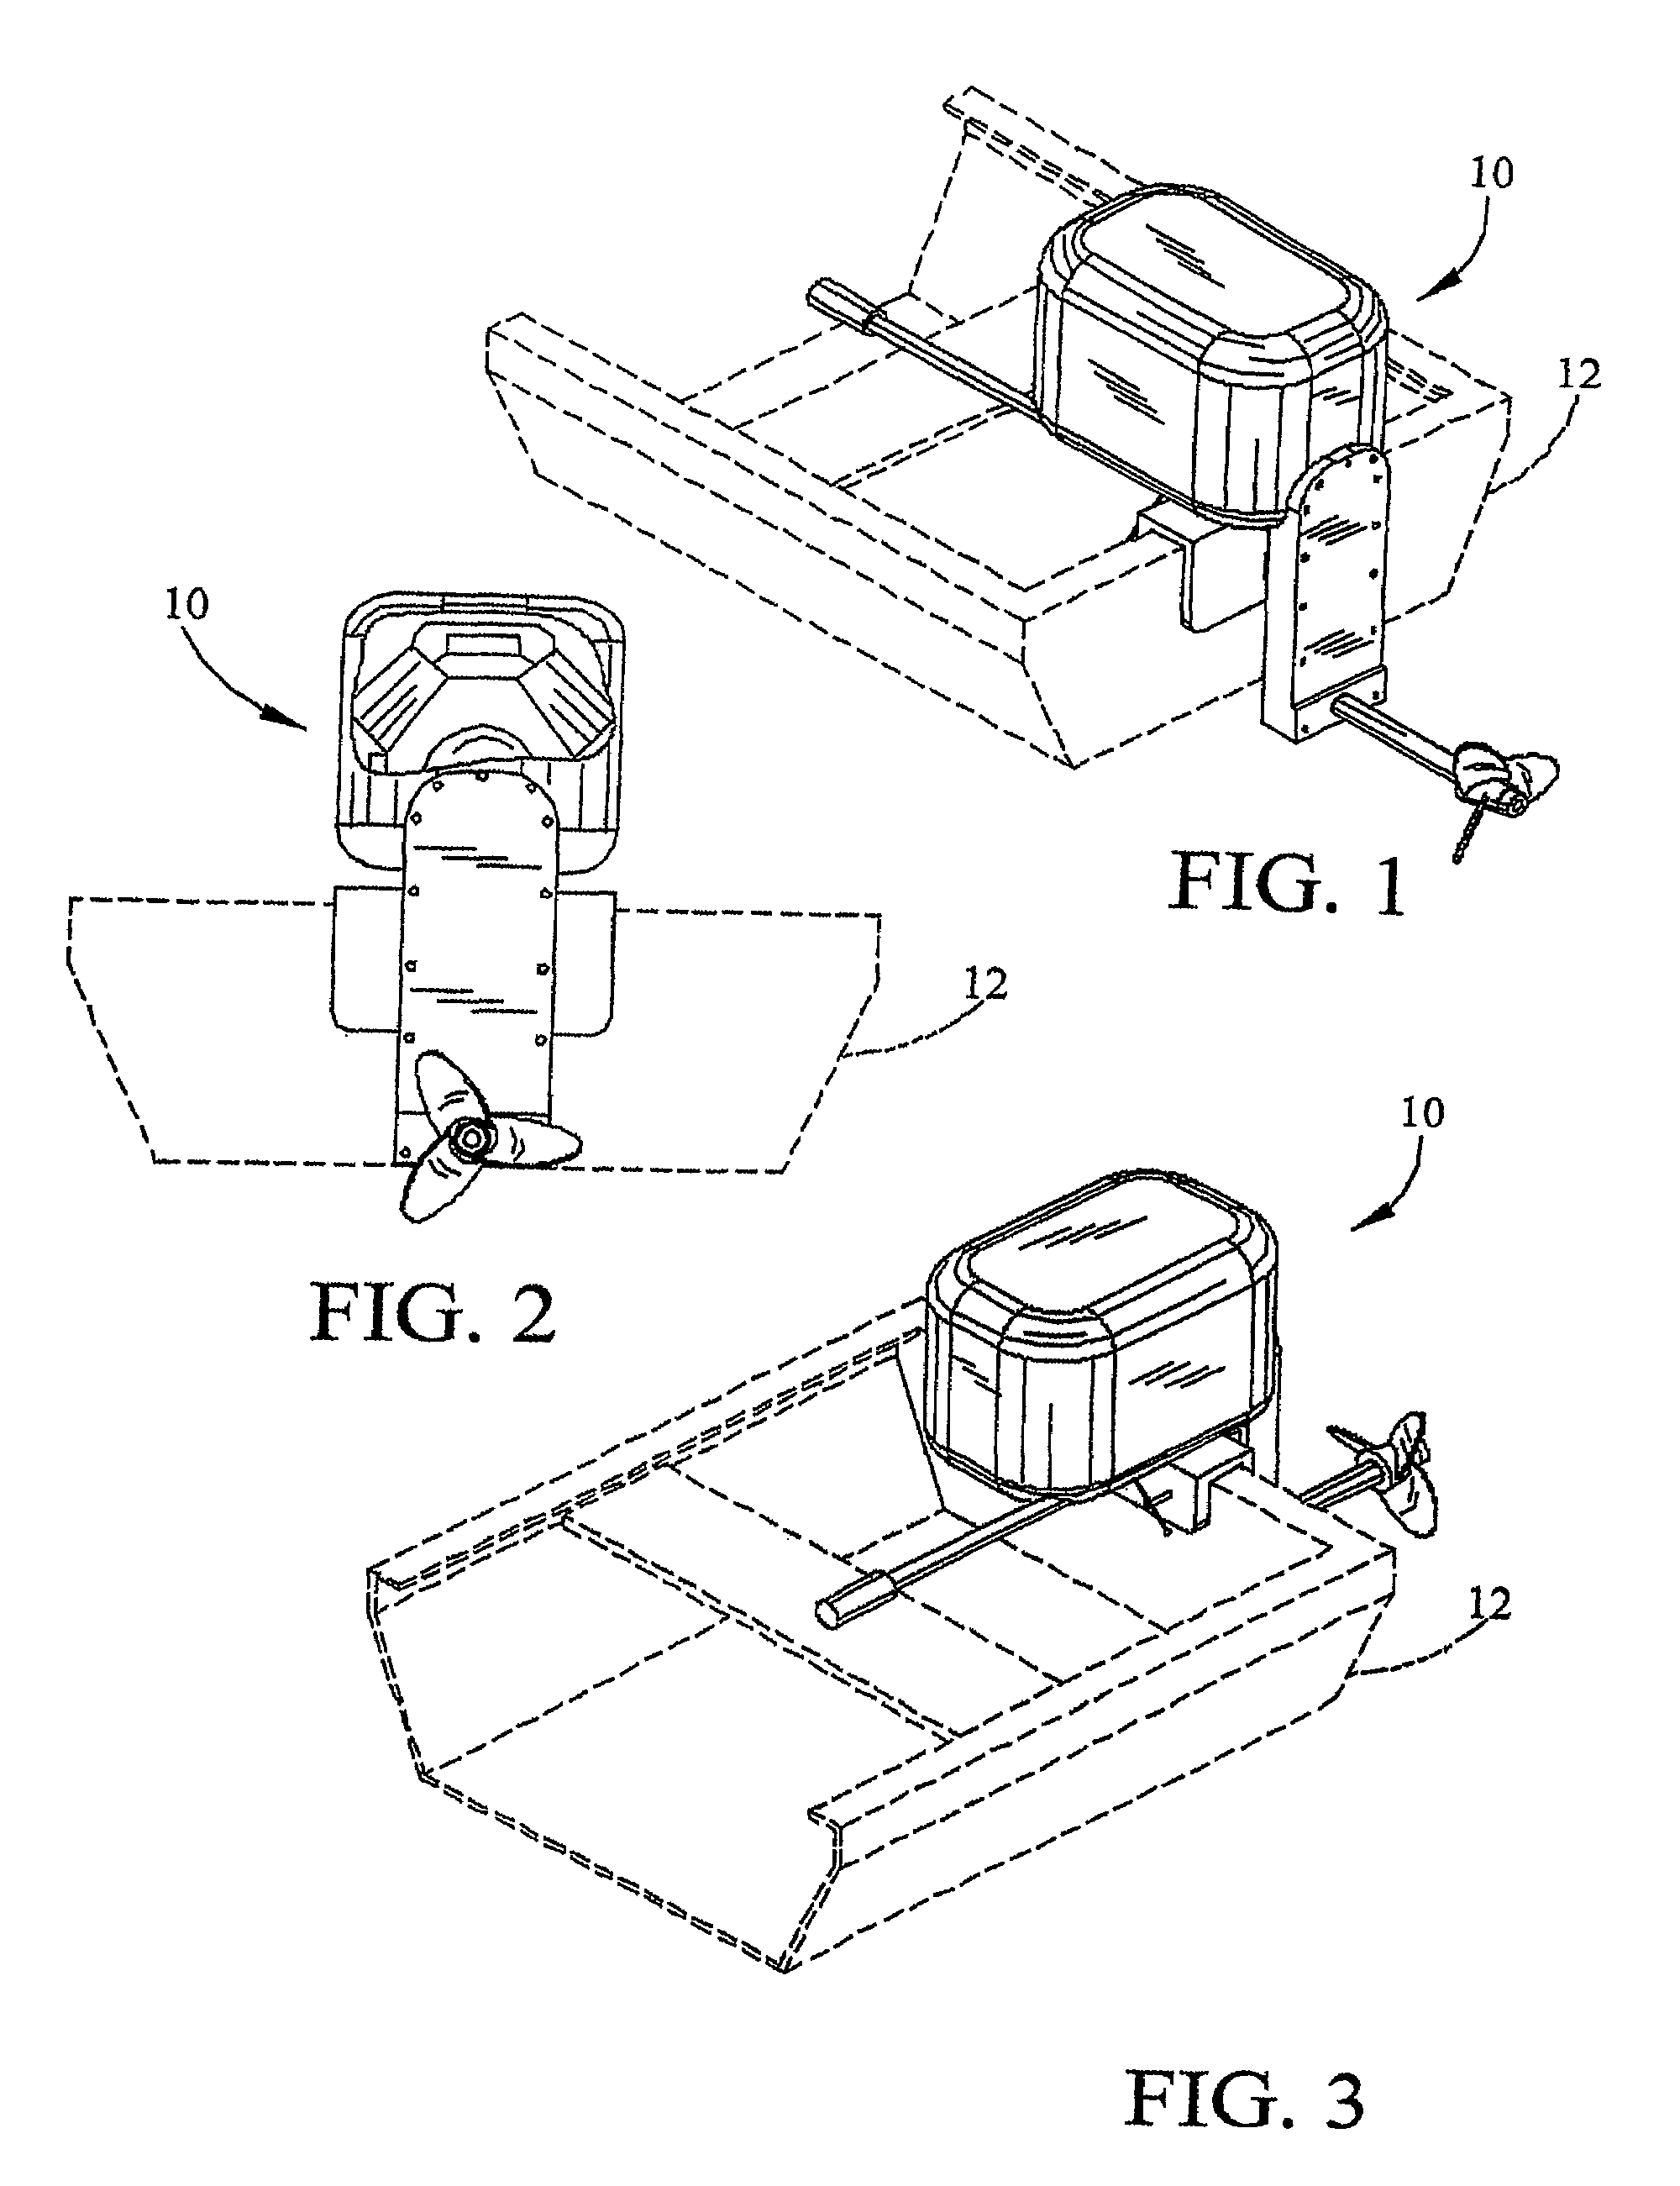 Method and apparatus for air cooled outboad motor for small marine craft